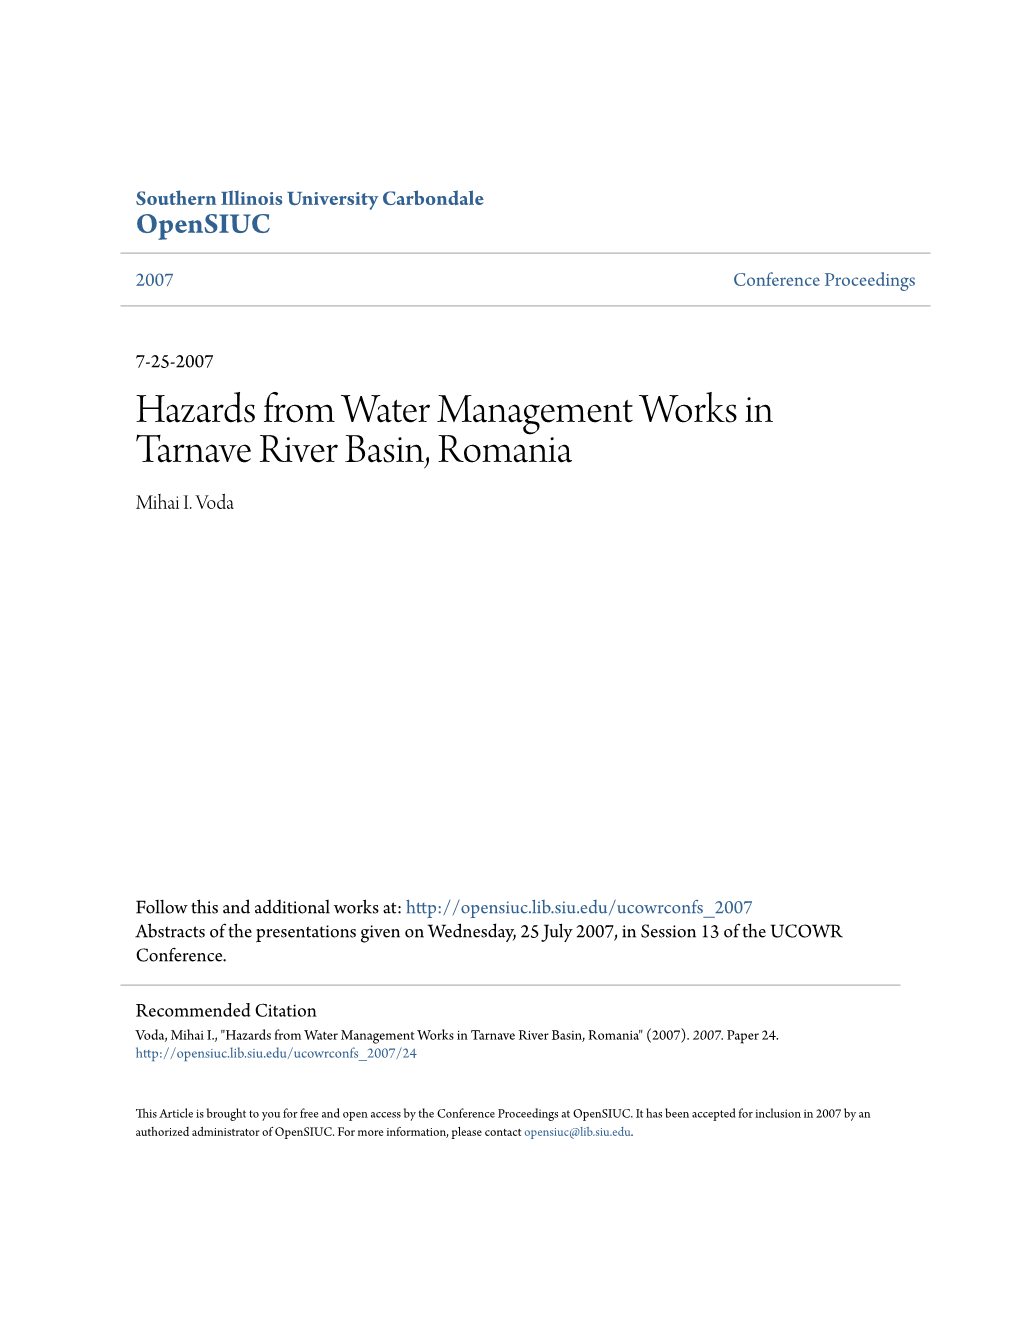 Hazards from Water Management Works in Tarnave River Basin, Romania Mihai I